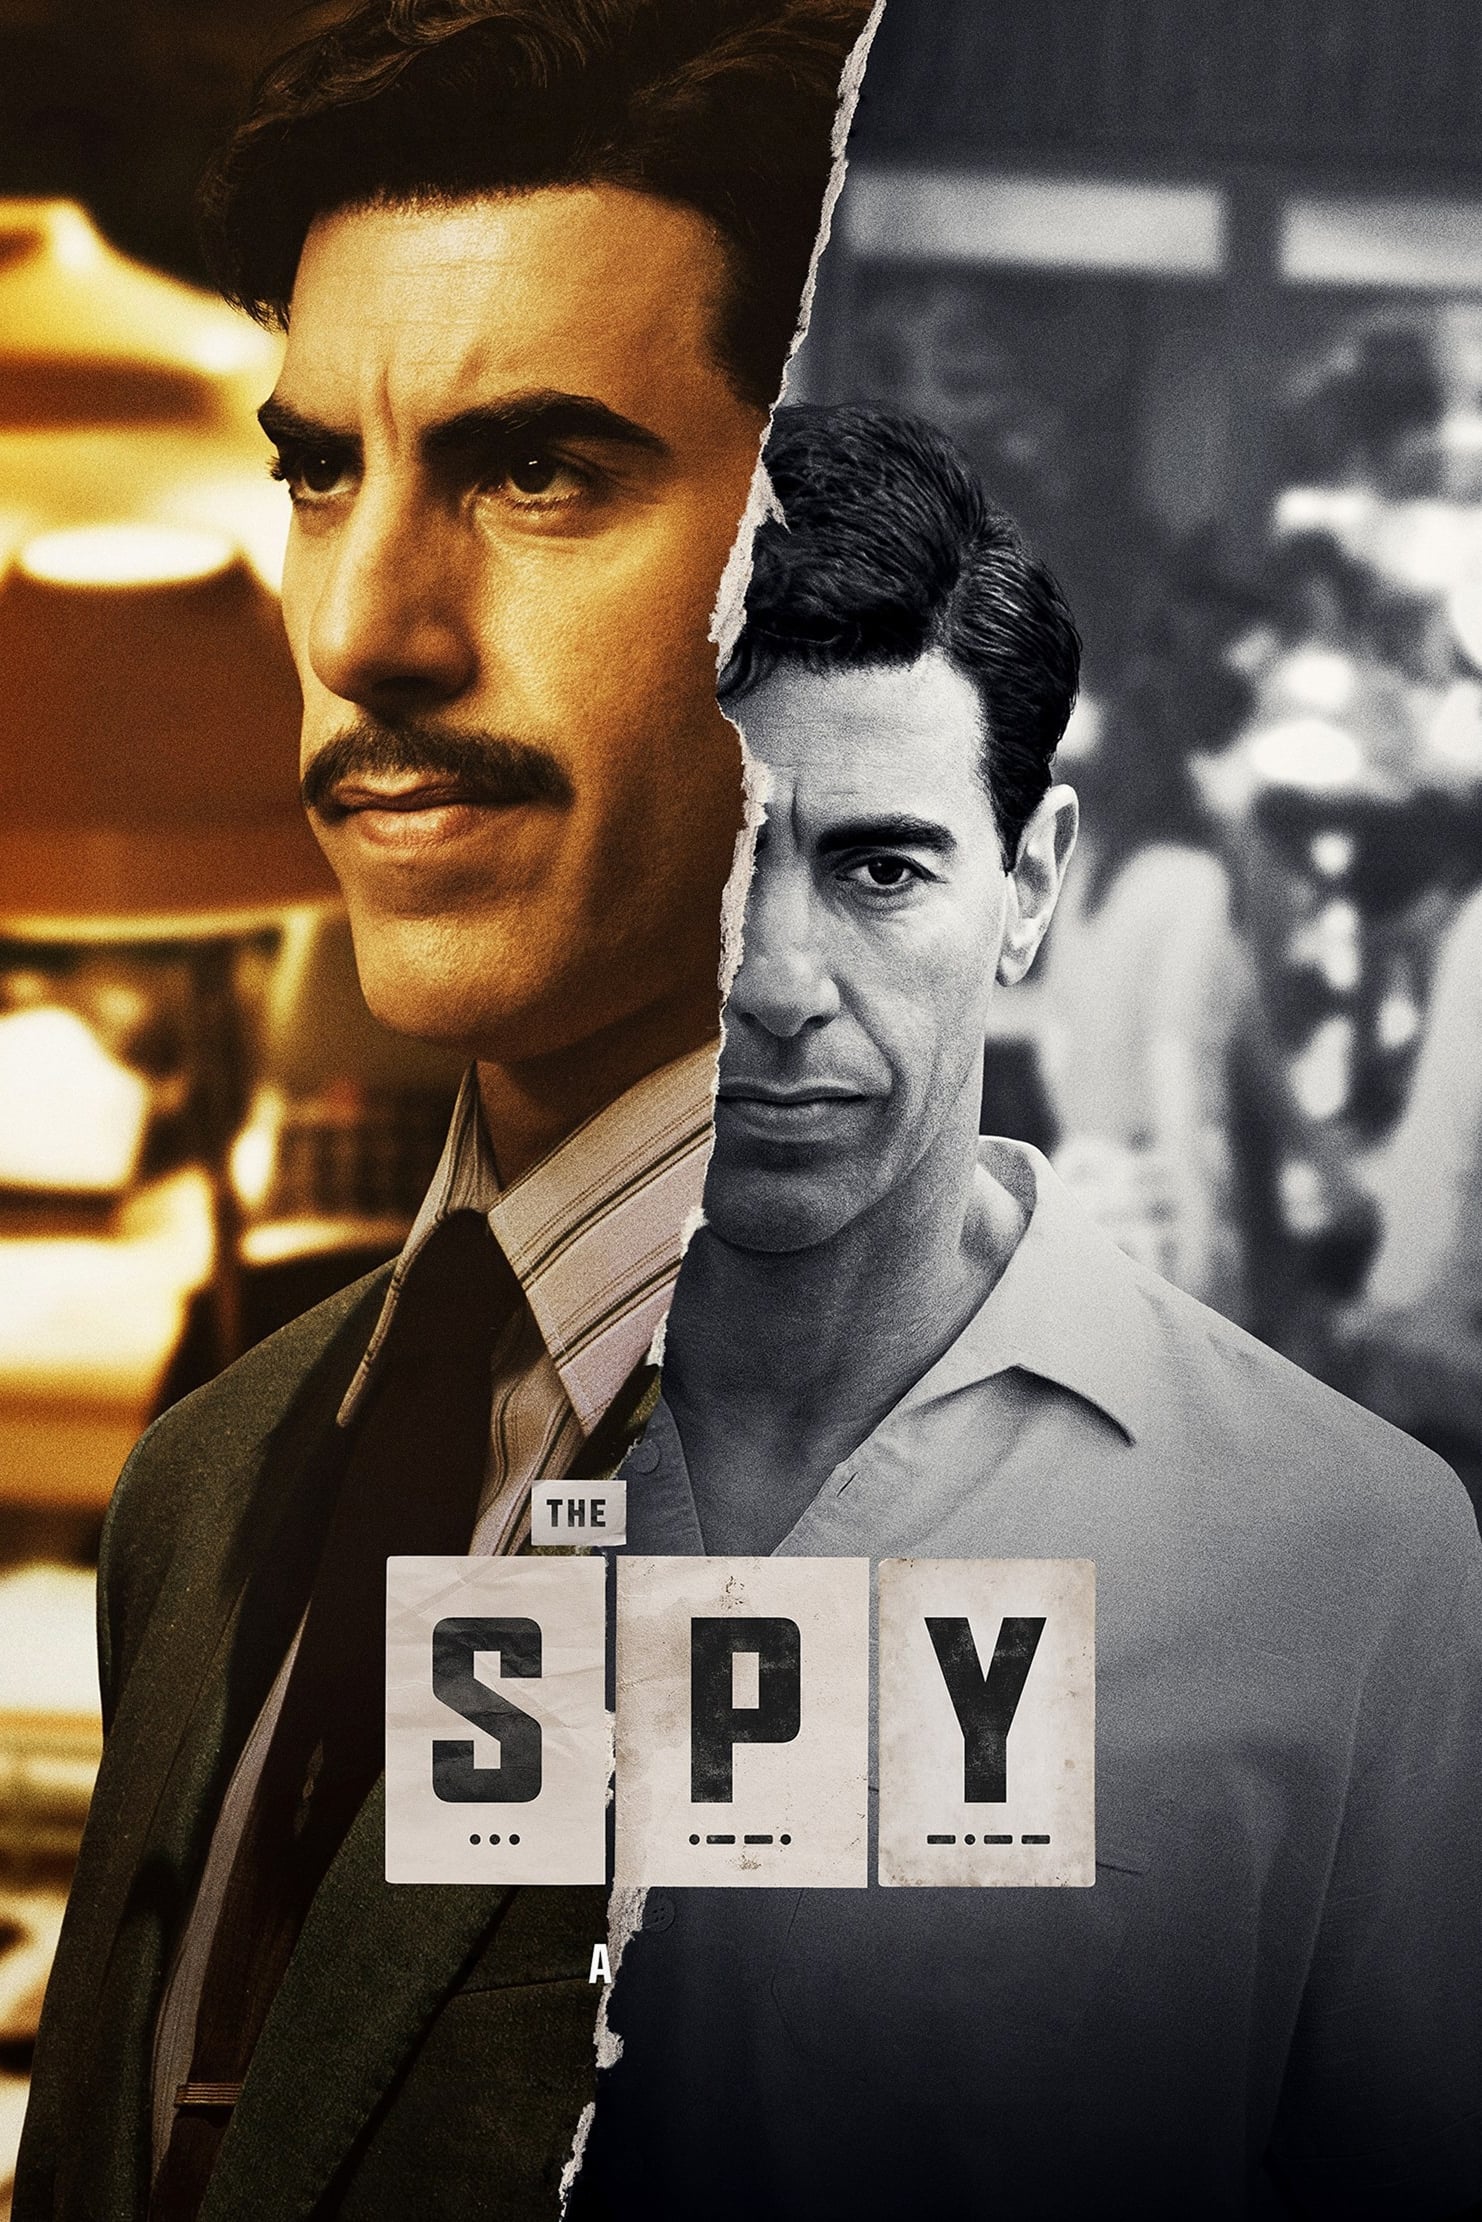 The Spy banner